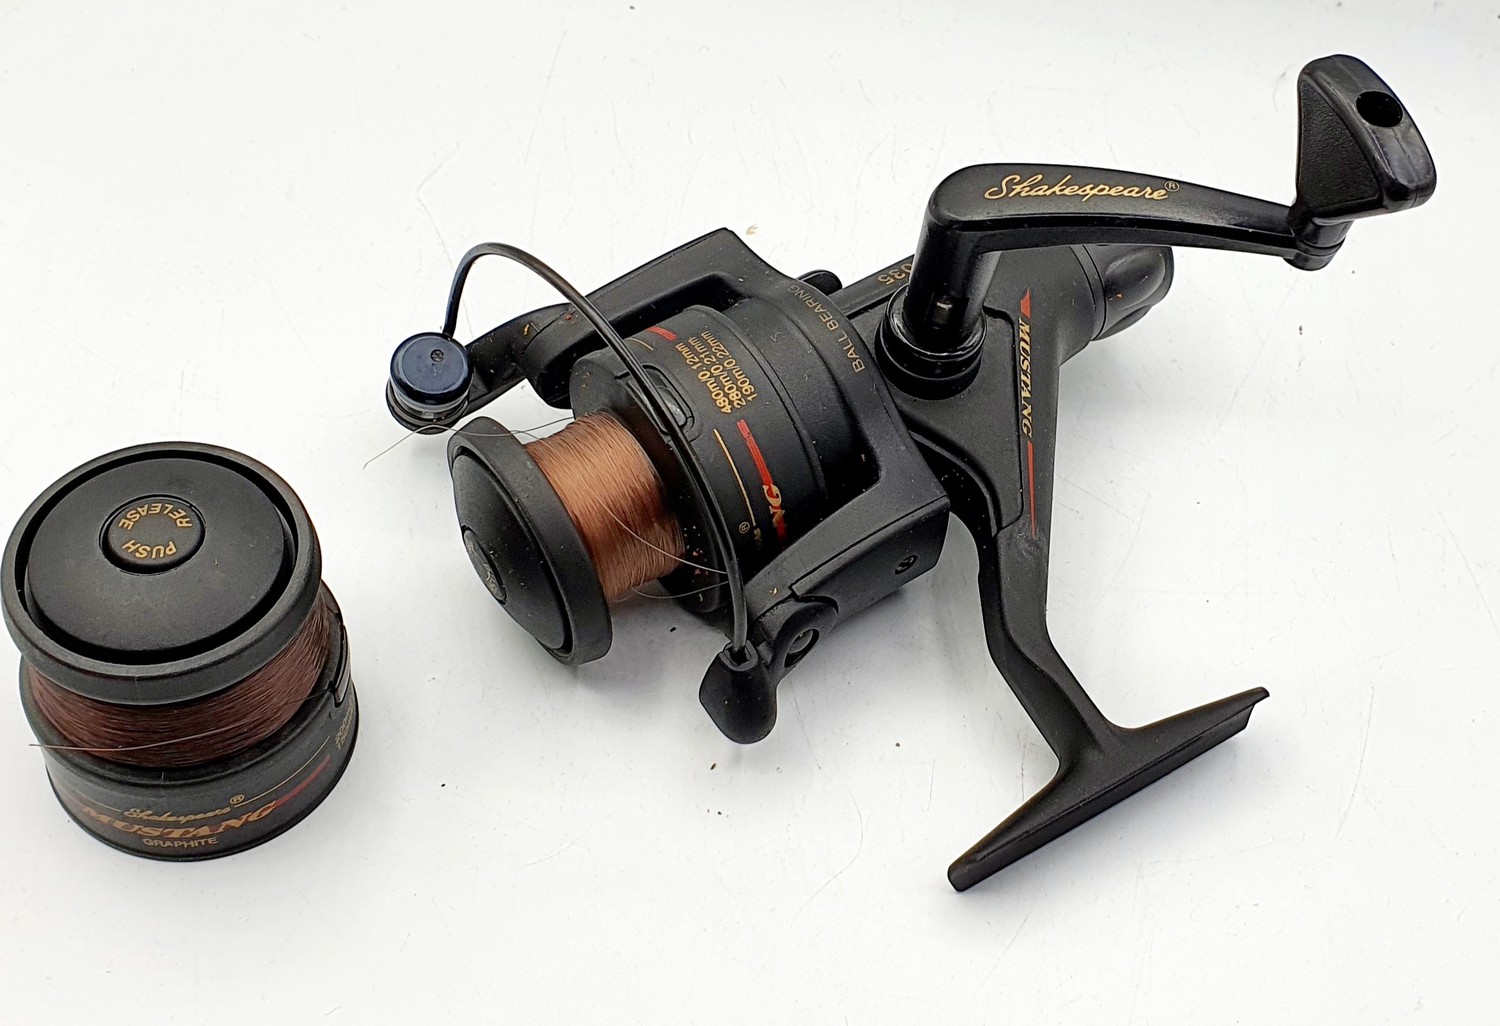 A Shakespeare Mustang Graphite Fishing Reel Features